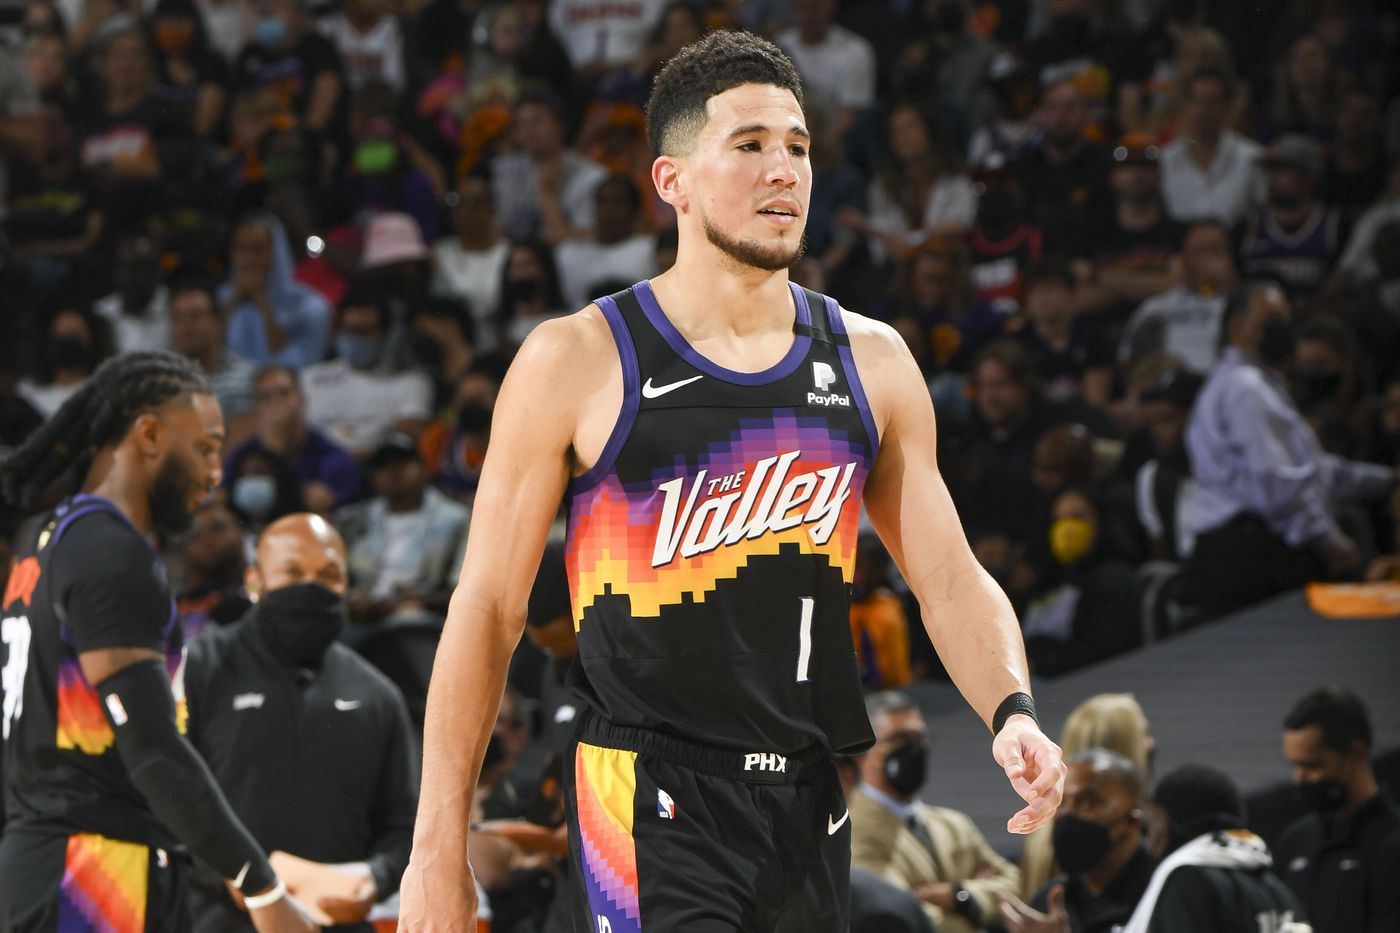 New Phoenix Suns City Edition Jerseys Bring Past And Present Together  Across 'The Valley